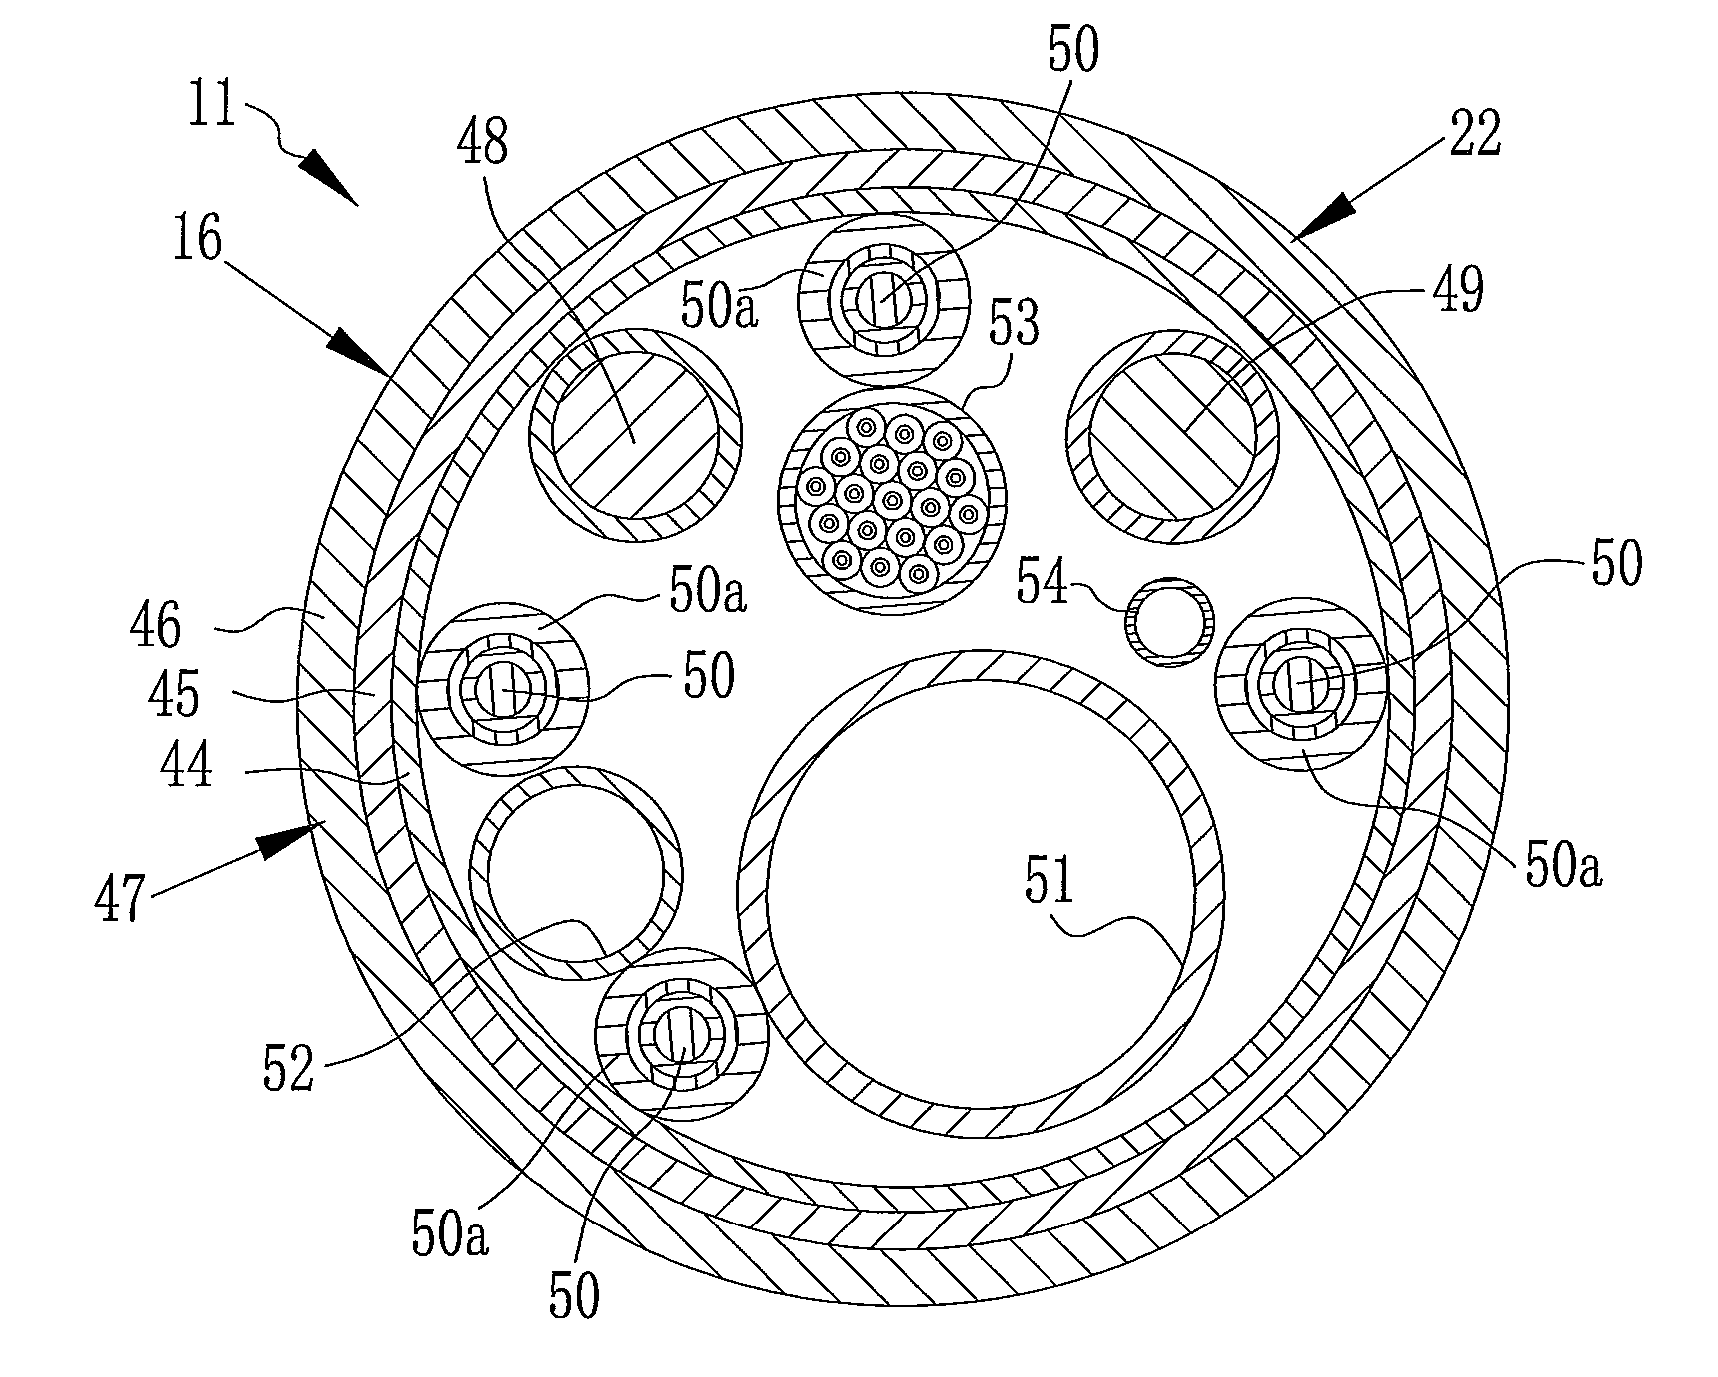 Endoscope system and assist device